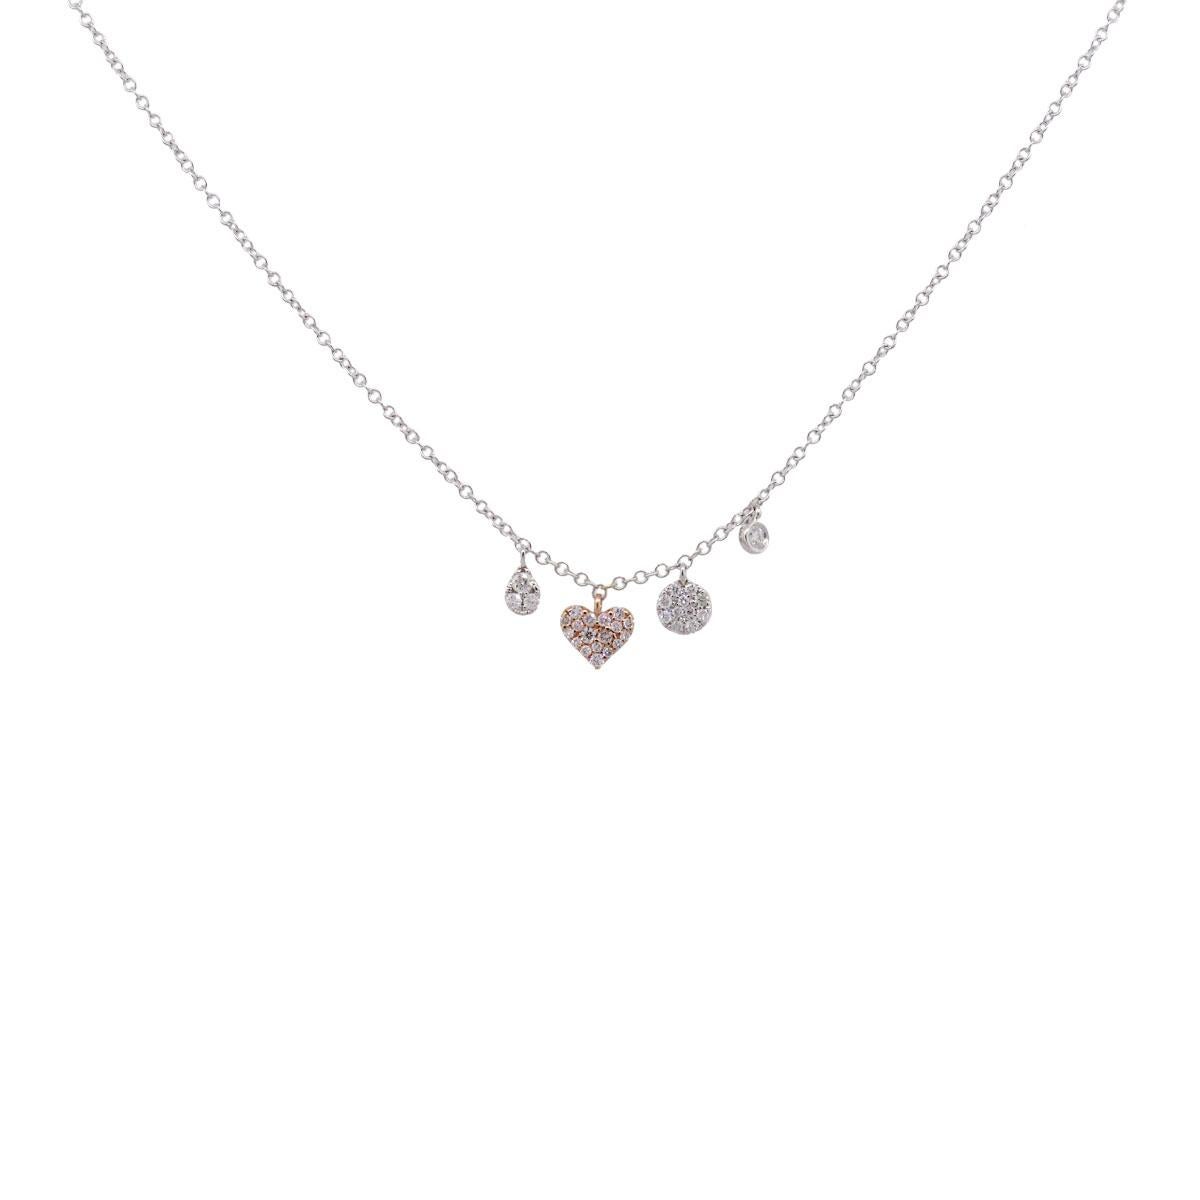 Material: 14k white gold
Diamond Details: Approximately 0.18ctw of round diamonds. Diamonds are G/H in color and VS in clarity
Measurements: Necklace measures 16.5″ – 18″
Fastening: Lobster claw clasp
Item Weight: 2g (1.2dwt)
Additional Details: